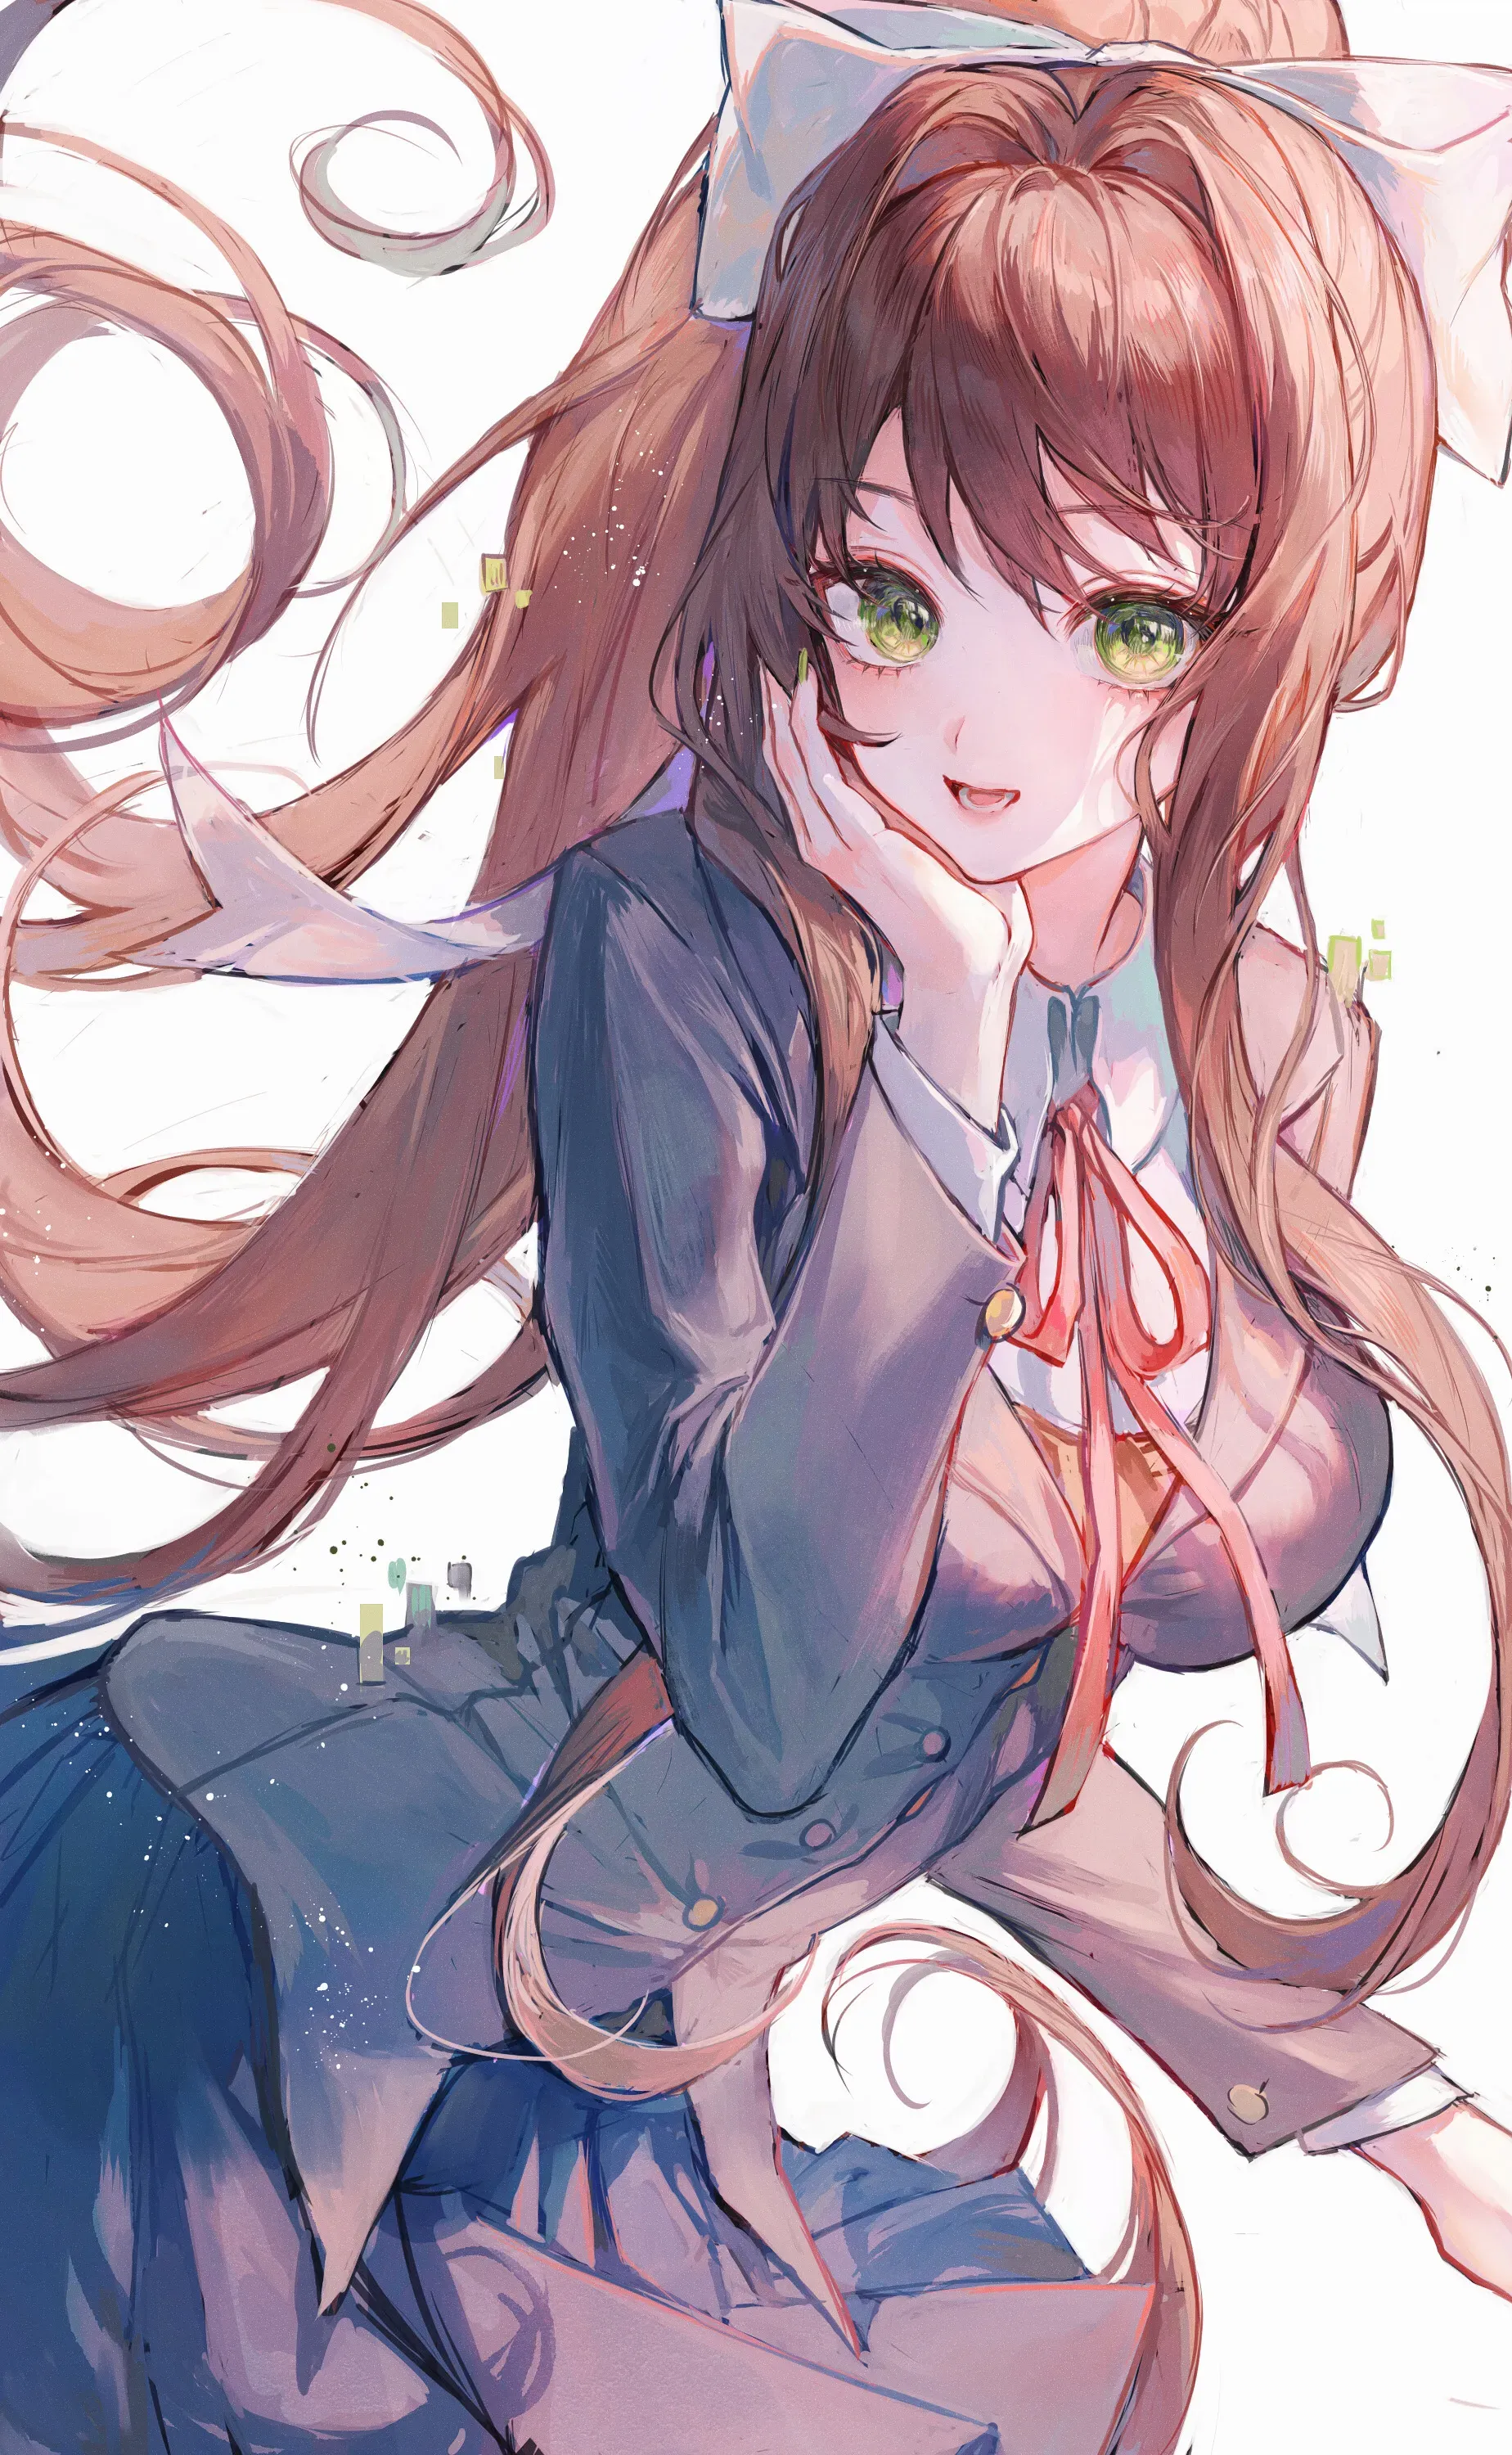 Avatar of Monika || You'll be together forever.